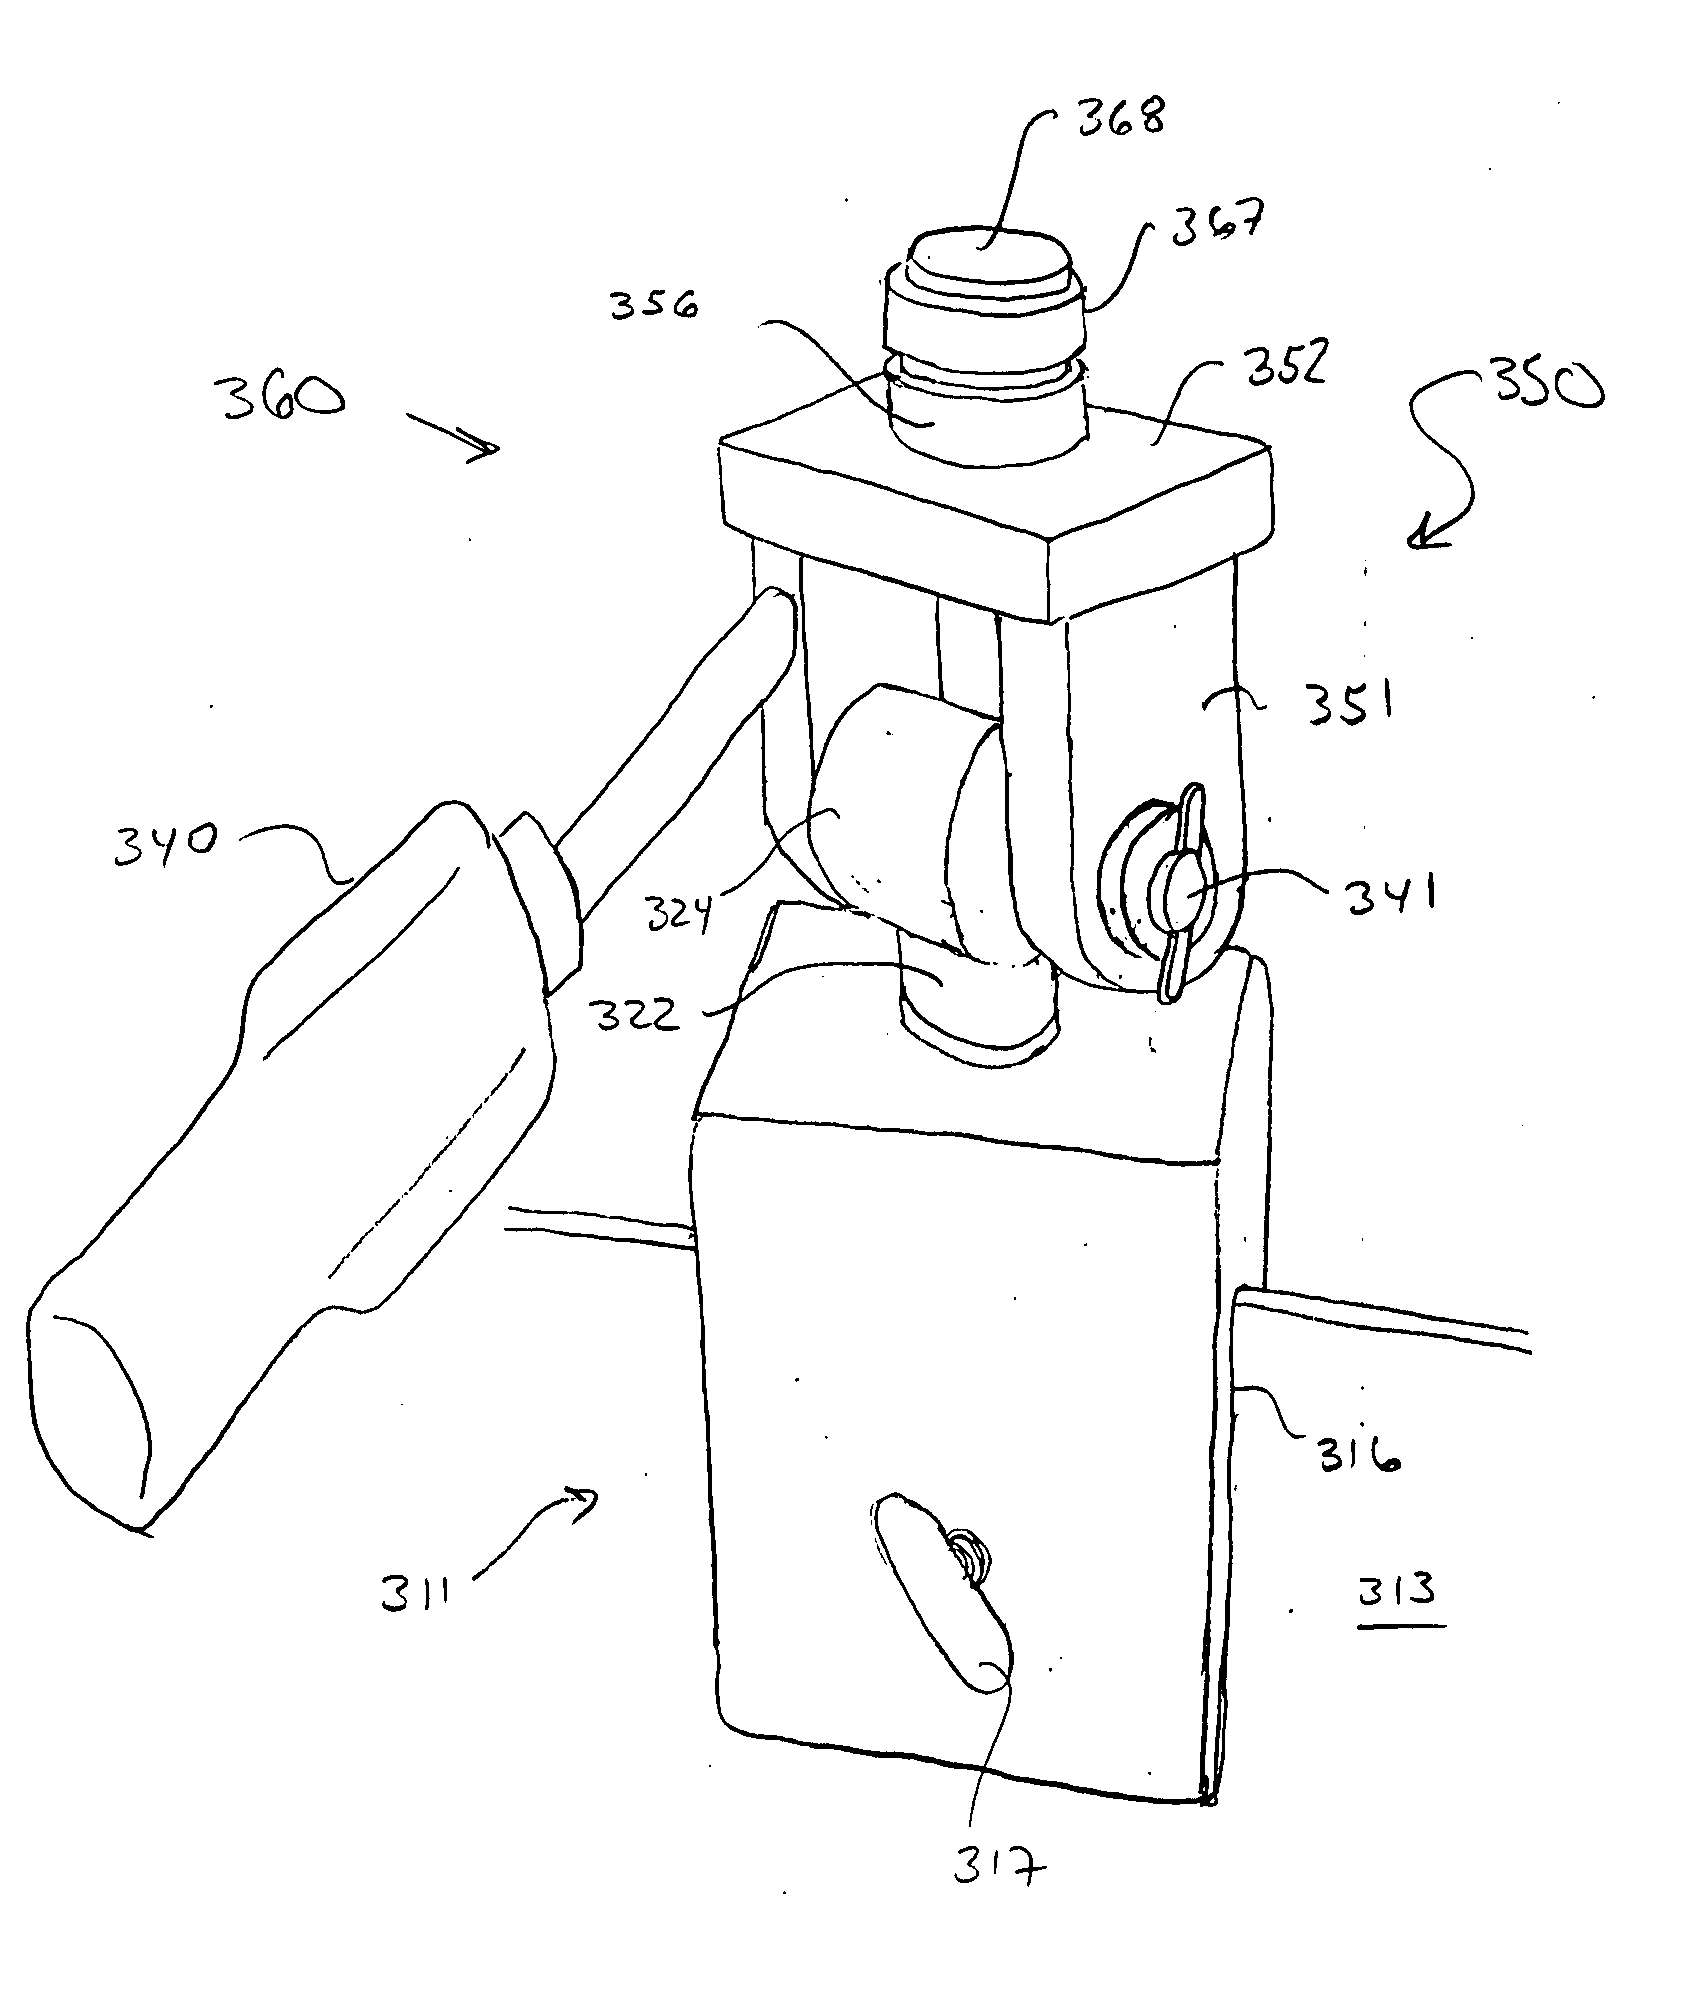 Magnetic-based releasable, adjustable camera or other device mount apparatus